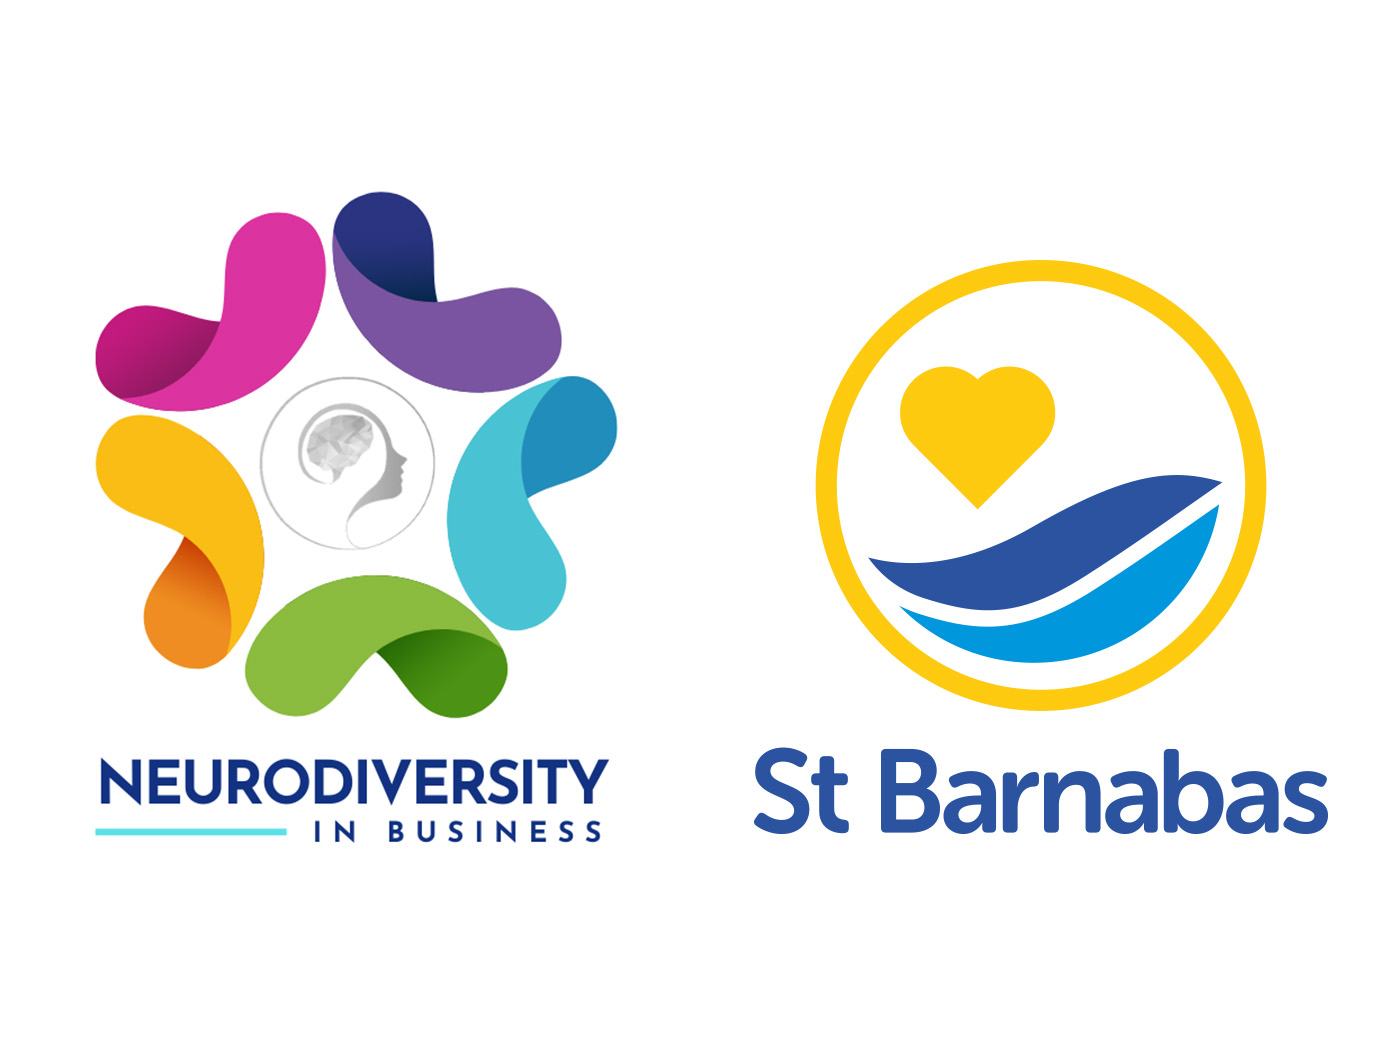 The two logos of St Barnabas Hospice, and the Neurodiversity in Business Forum.